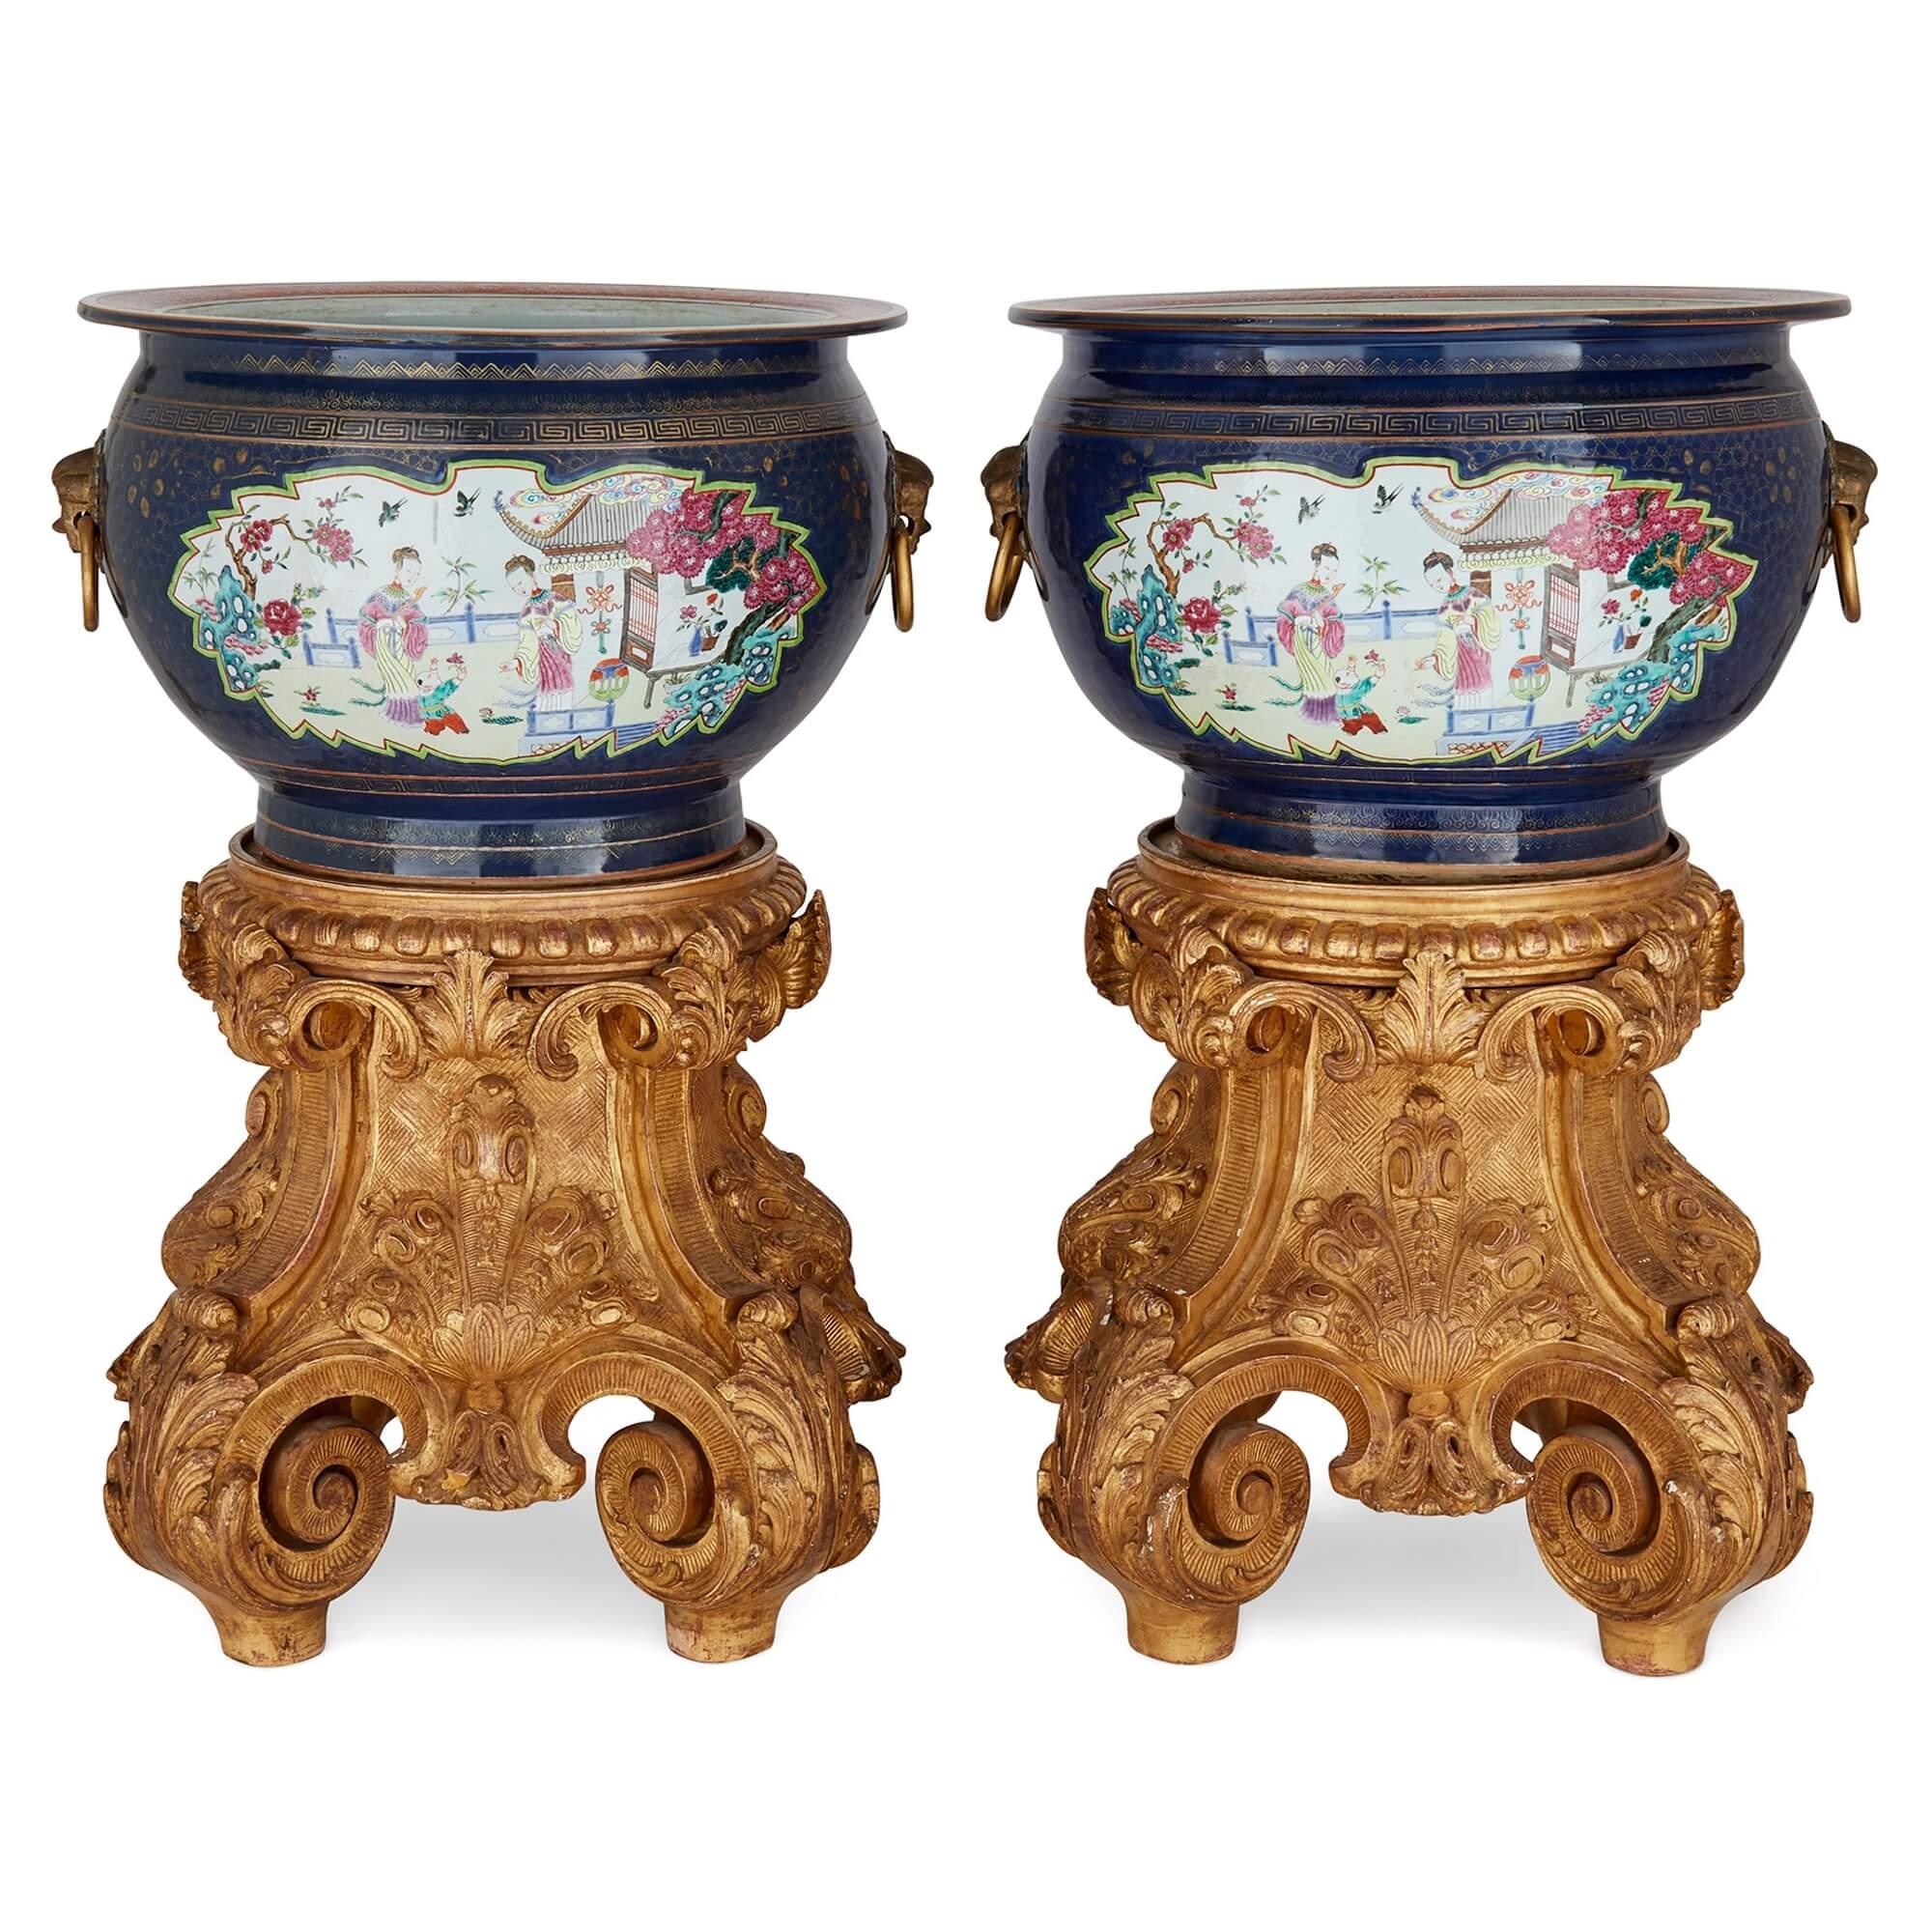 Painted Pair of Large Antique Famille-Rose Porcelain Fish Bowls with Giltwood Stands For Sale